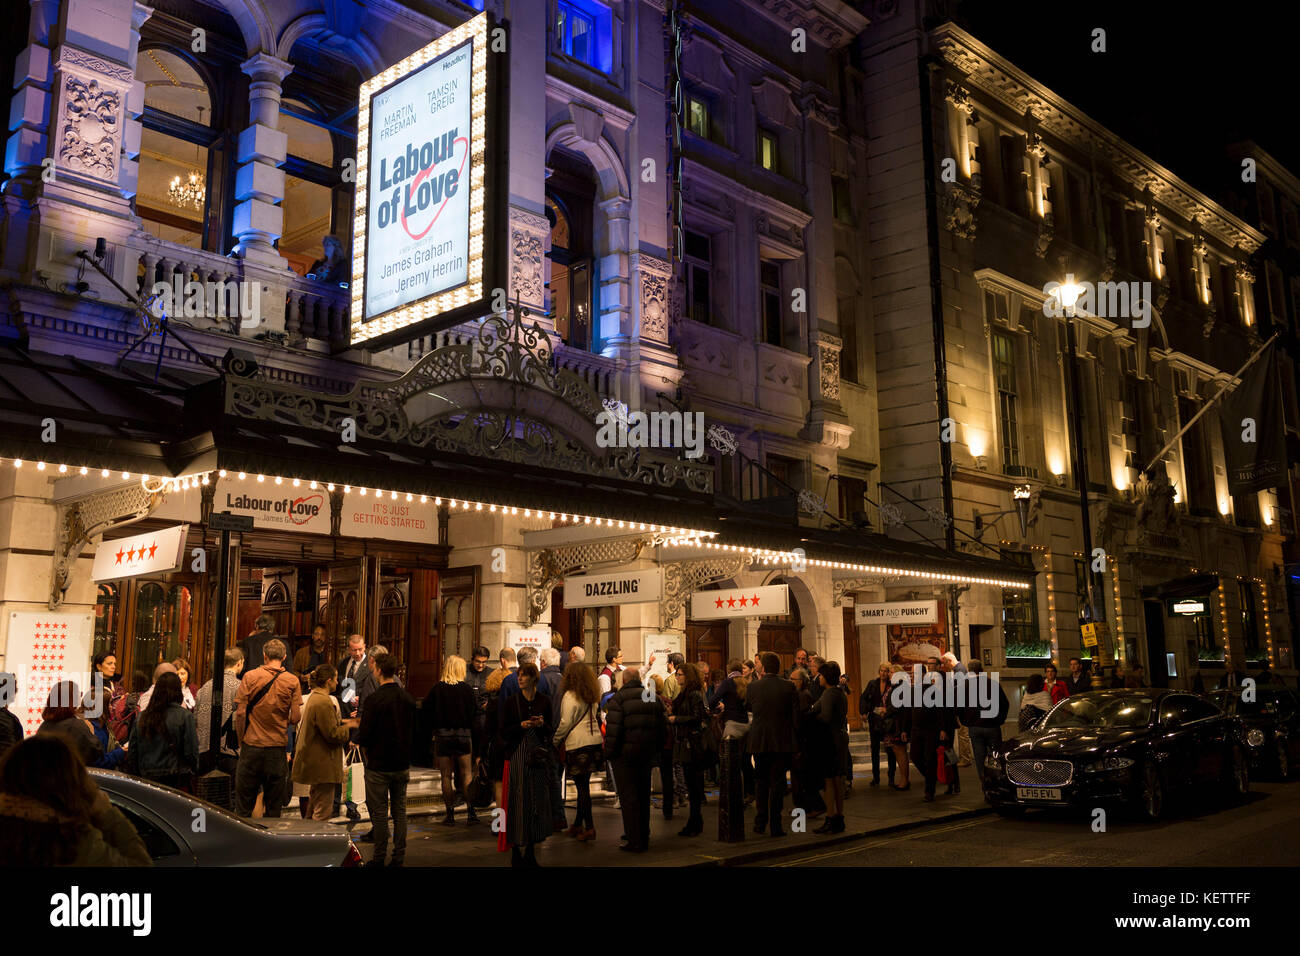 Theatre-goers outside the Noel Coward Theatre in St. Martin's Lane queue to see Labour of Love, a political comedy by James Graham and starring Martin Freeman and Tamsin Greig, on 16th October 2017, in London, England. Stock Photo